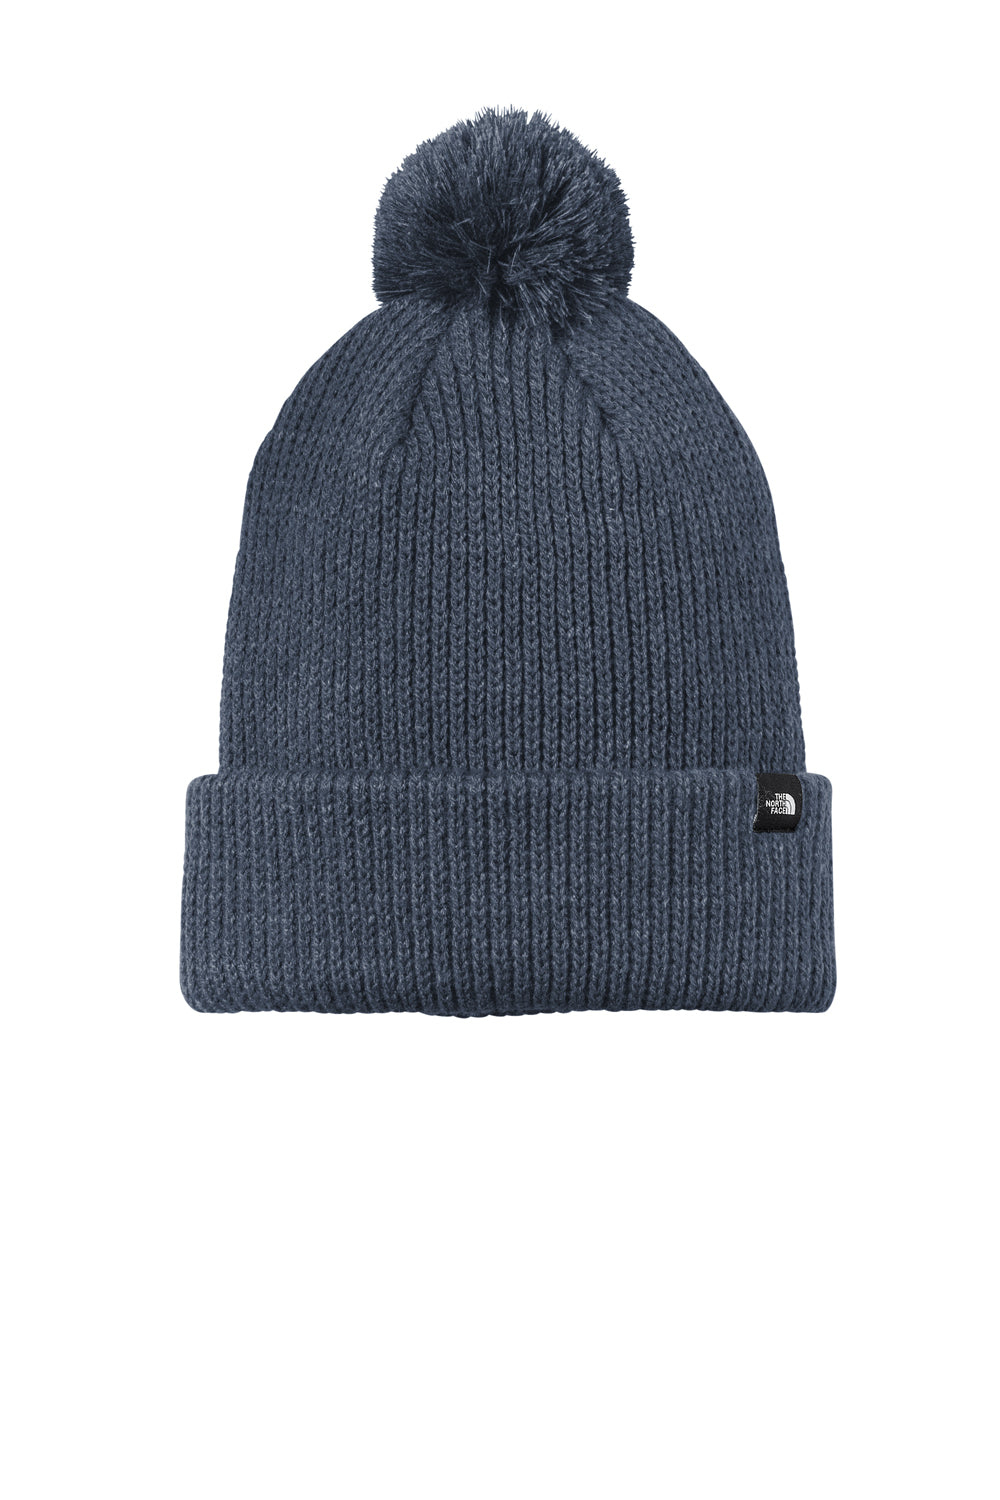 The North Face NF0A7RGI Pom Beanie Shady Blue Front